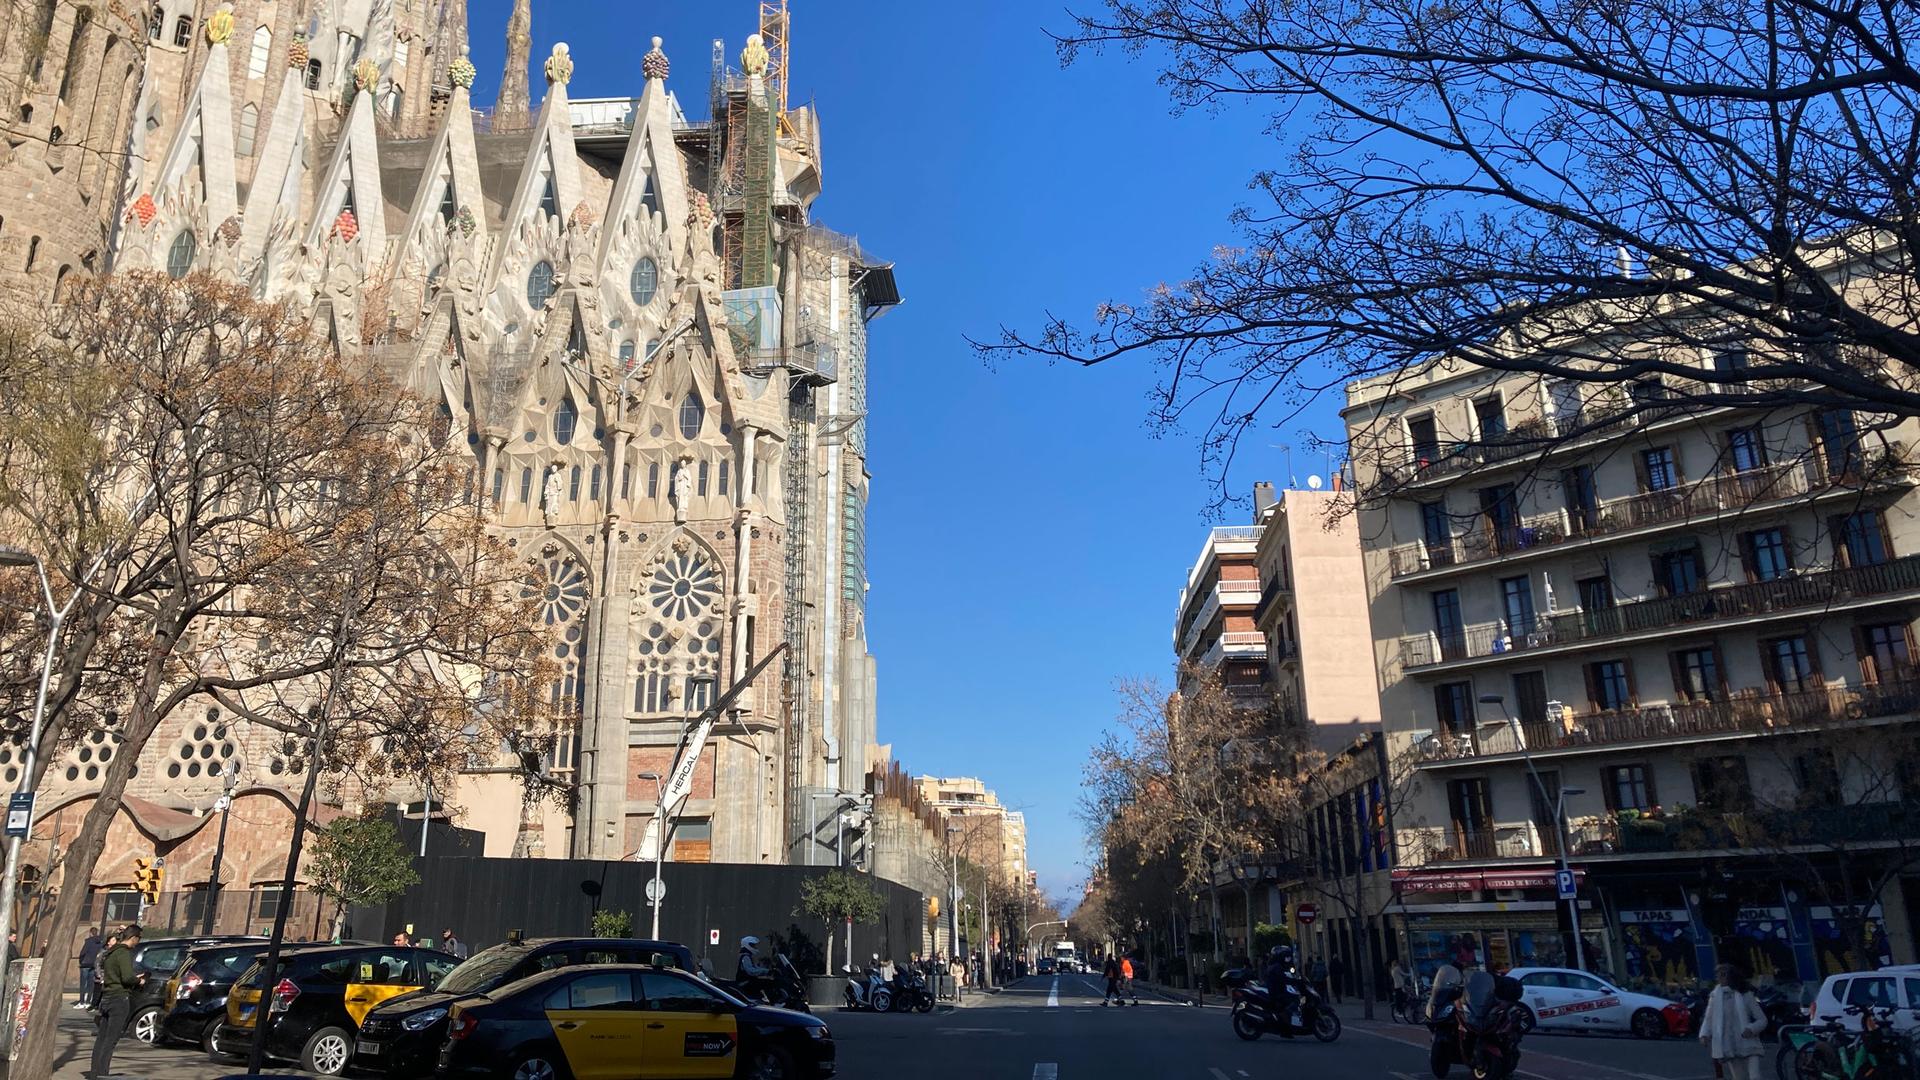 The Sagrada Familia, with its incomplete Glory facade, faces an apartment complex that could get demolished if construction plans go through. 